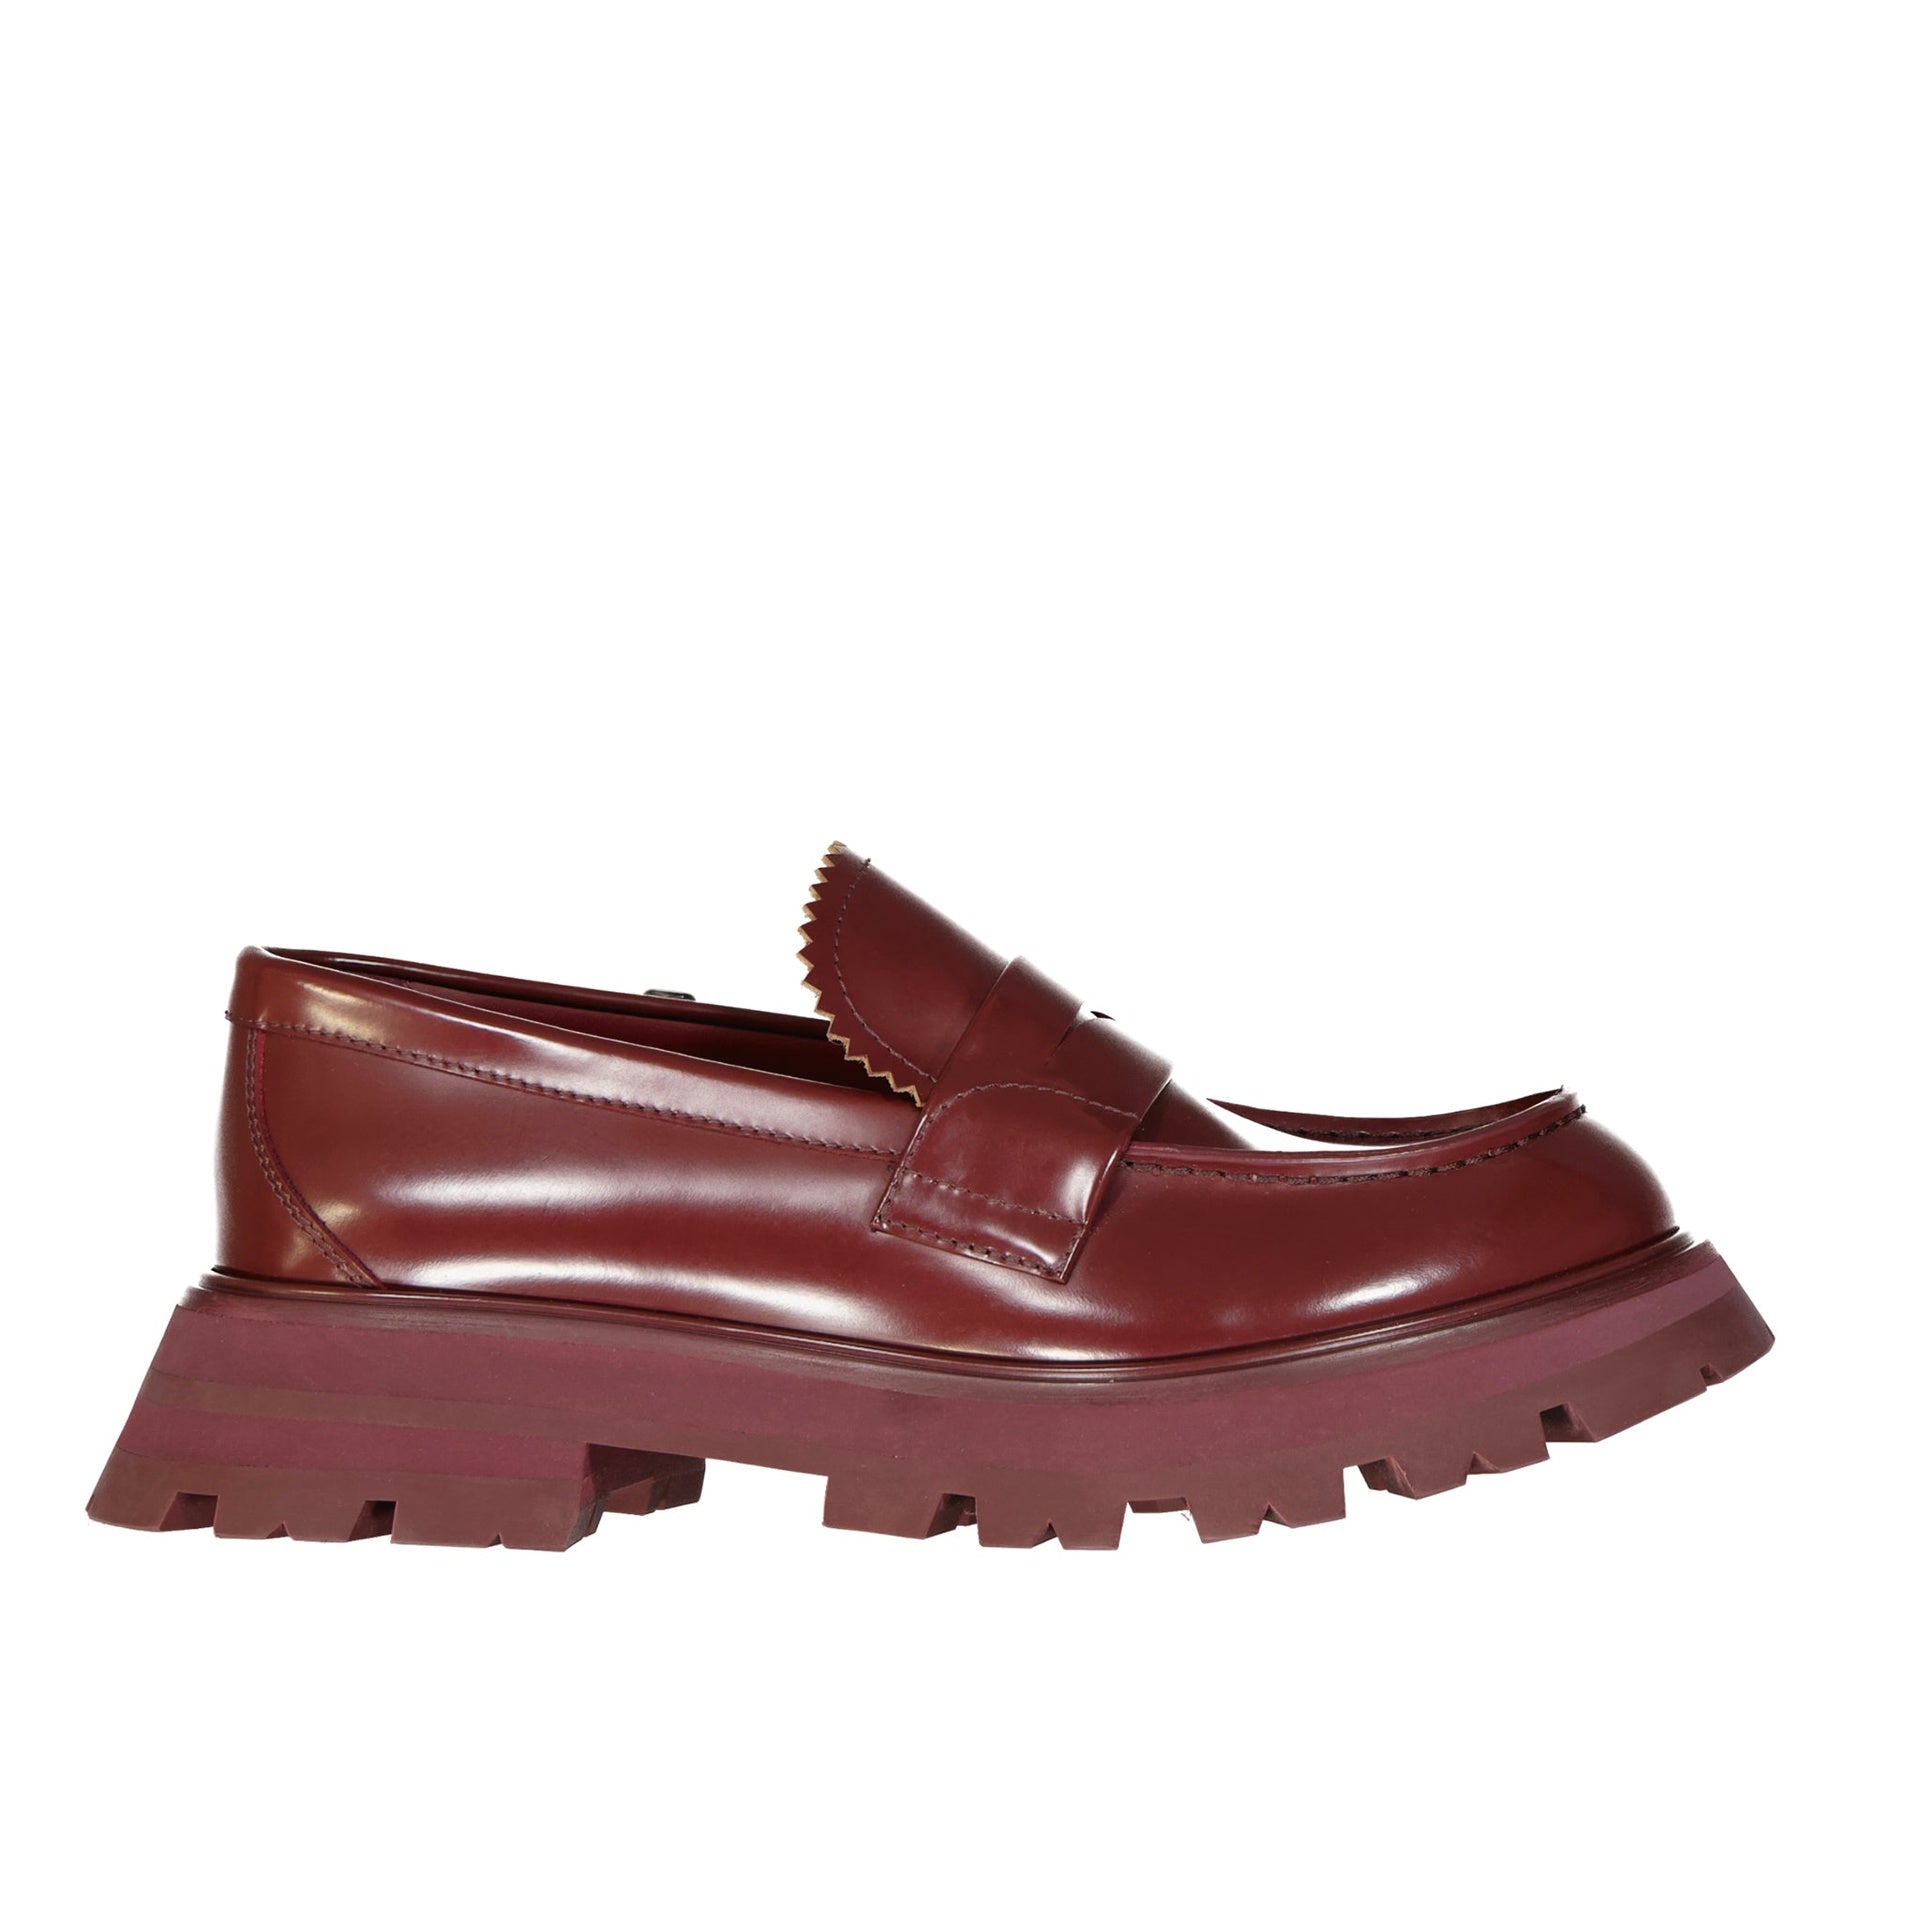 ALEXANDER-MCQUEEN-OUTLET-SALE-Alexander-Mcqueen-Leather-Loafers-Flache-Schuhe-RED-39-ARCHIVE-COLLECTION.jpg